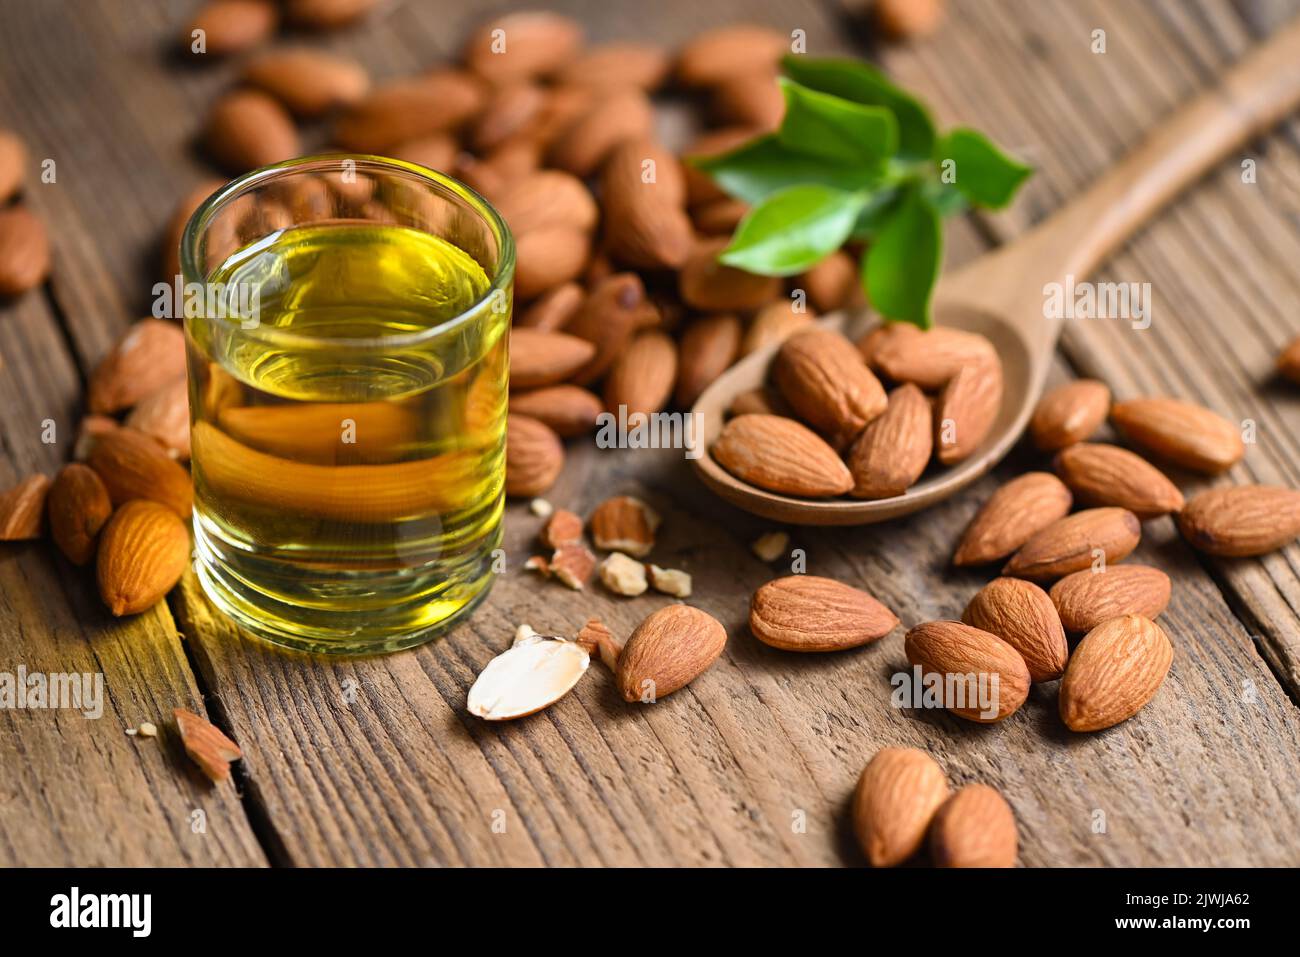 Almond oil and Almonds nuts on wooden, Delicious sweet almonds oil in glass, roasted almond nut for healthy food and snack organic vegetable oils for Stock Photo